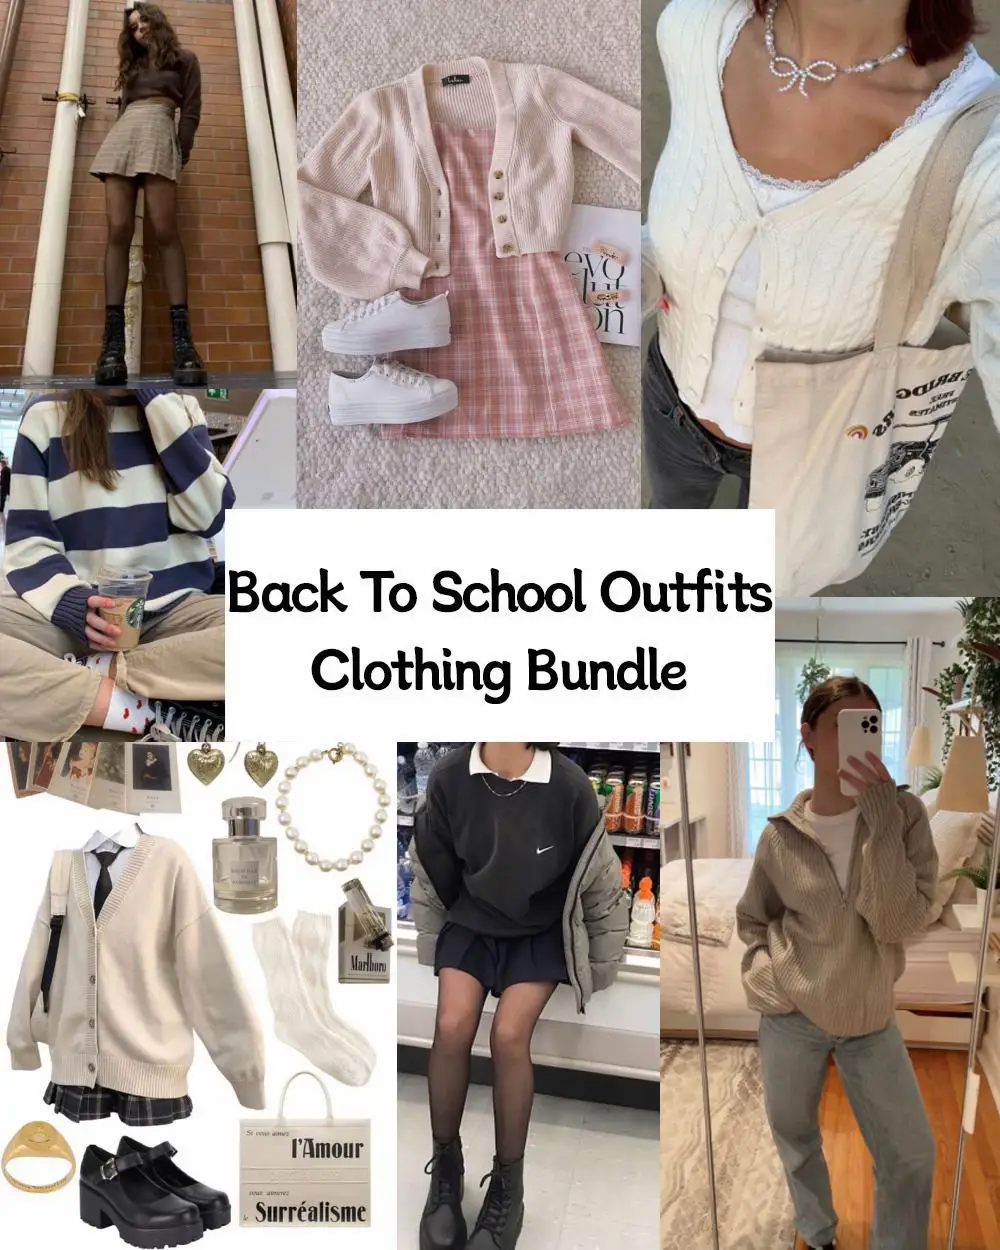 Back To School Outfits Clothing Bundle, Gallery posted by Rainbow 🌈